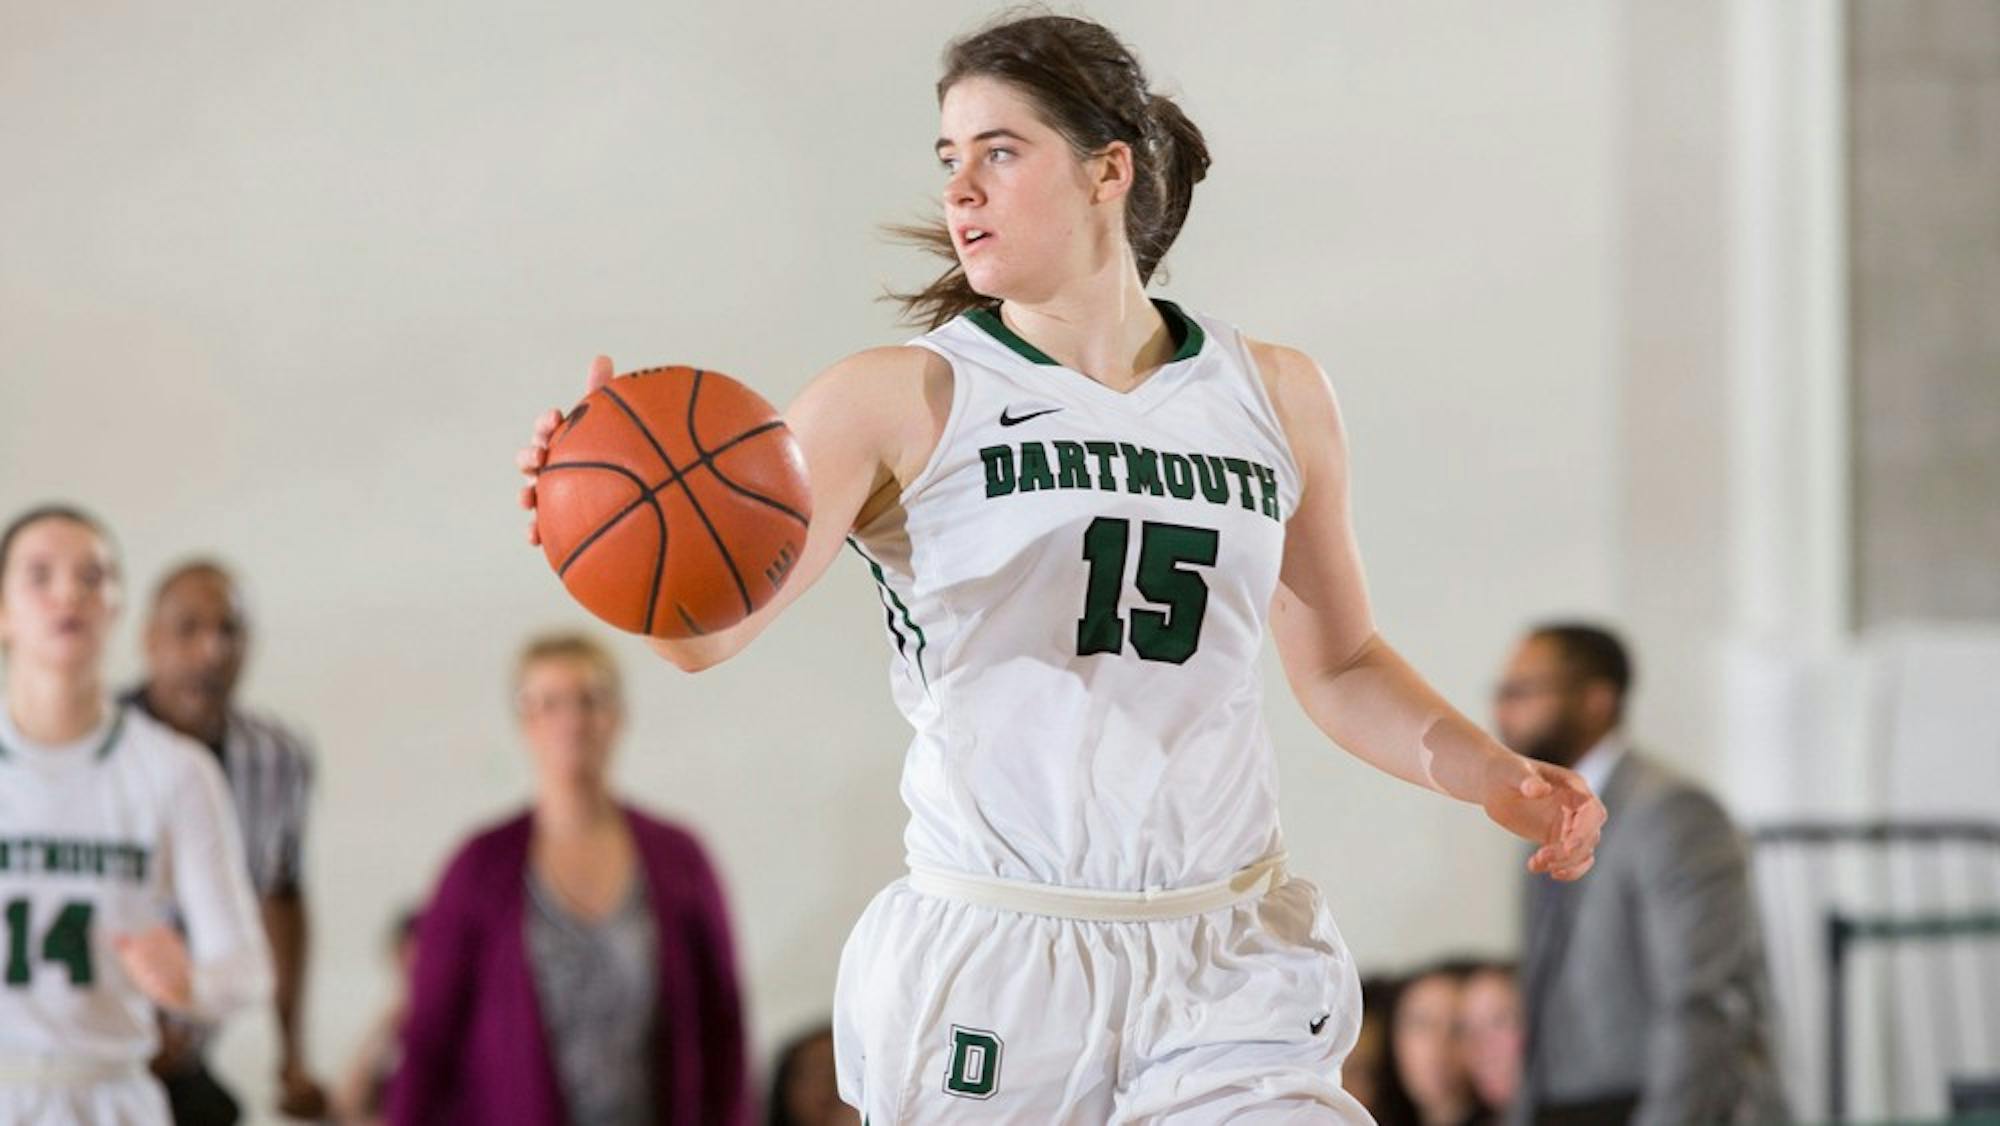 As the only senior on the women's basketball team, Fanni Szabo '17 has taken a leadership role both on and off the court.